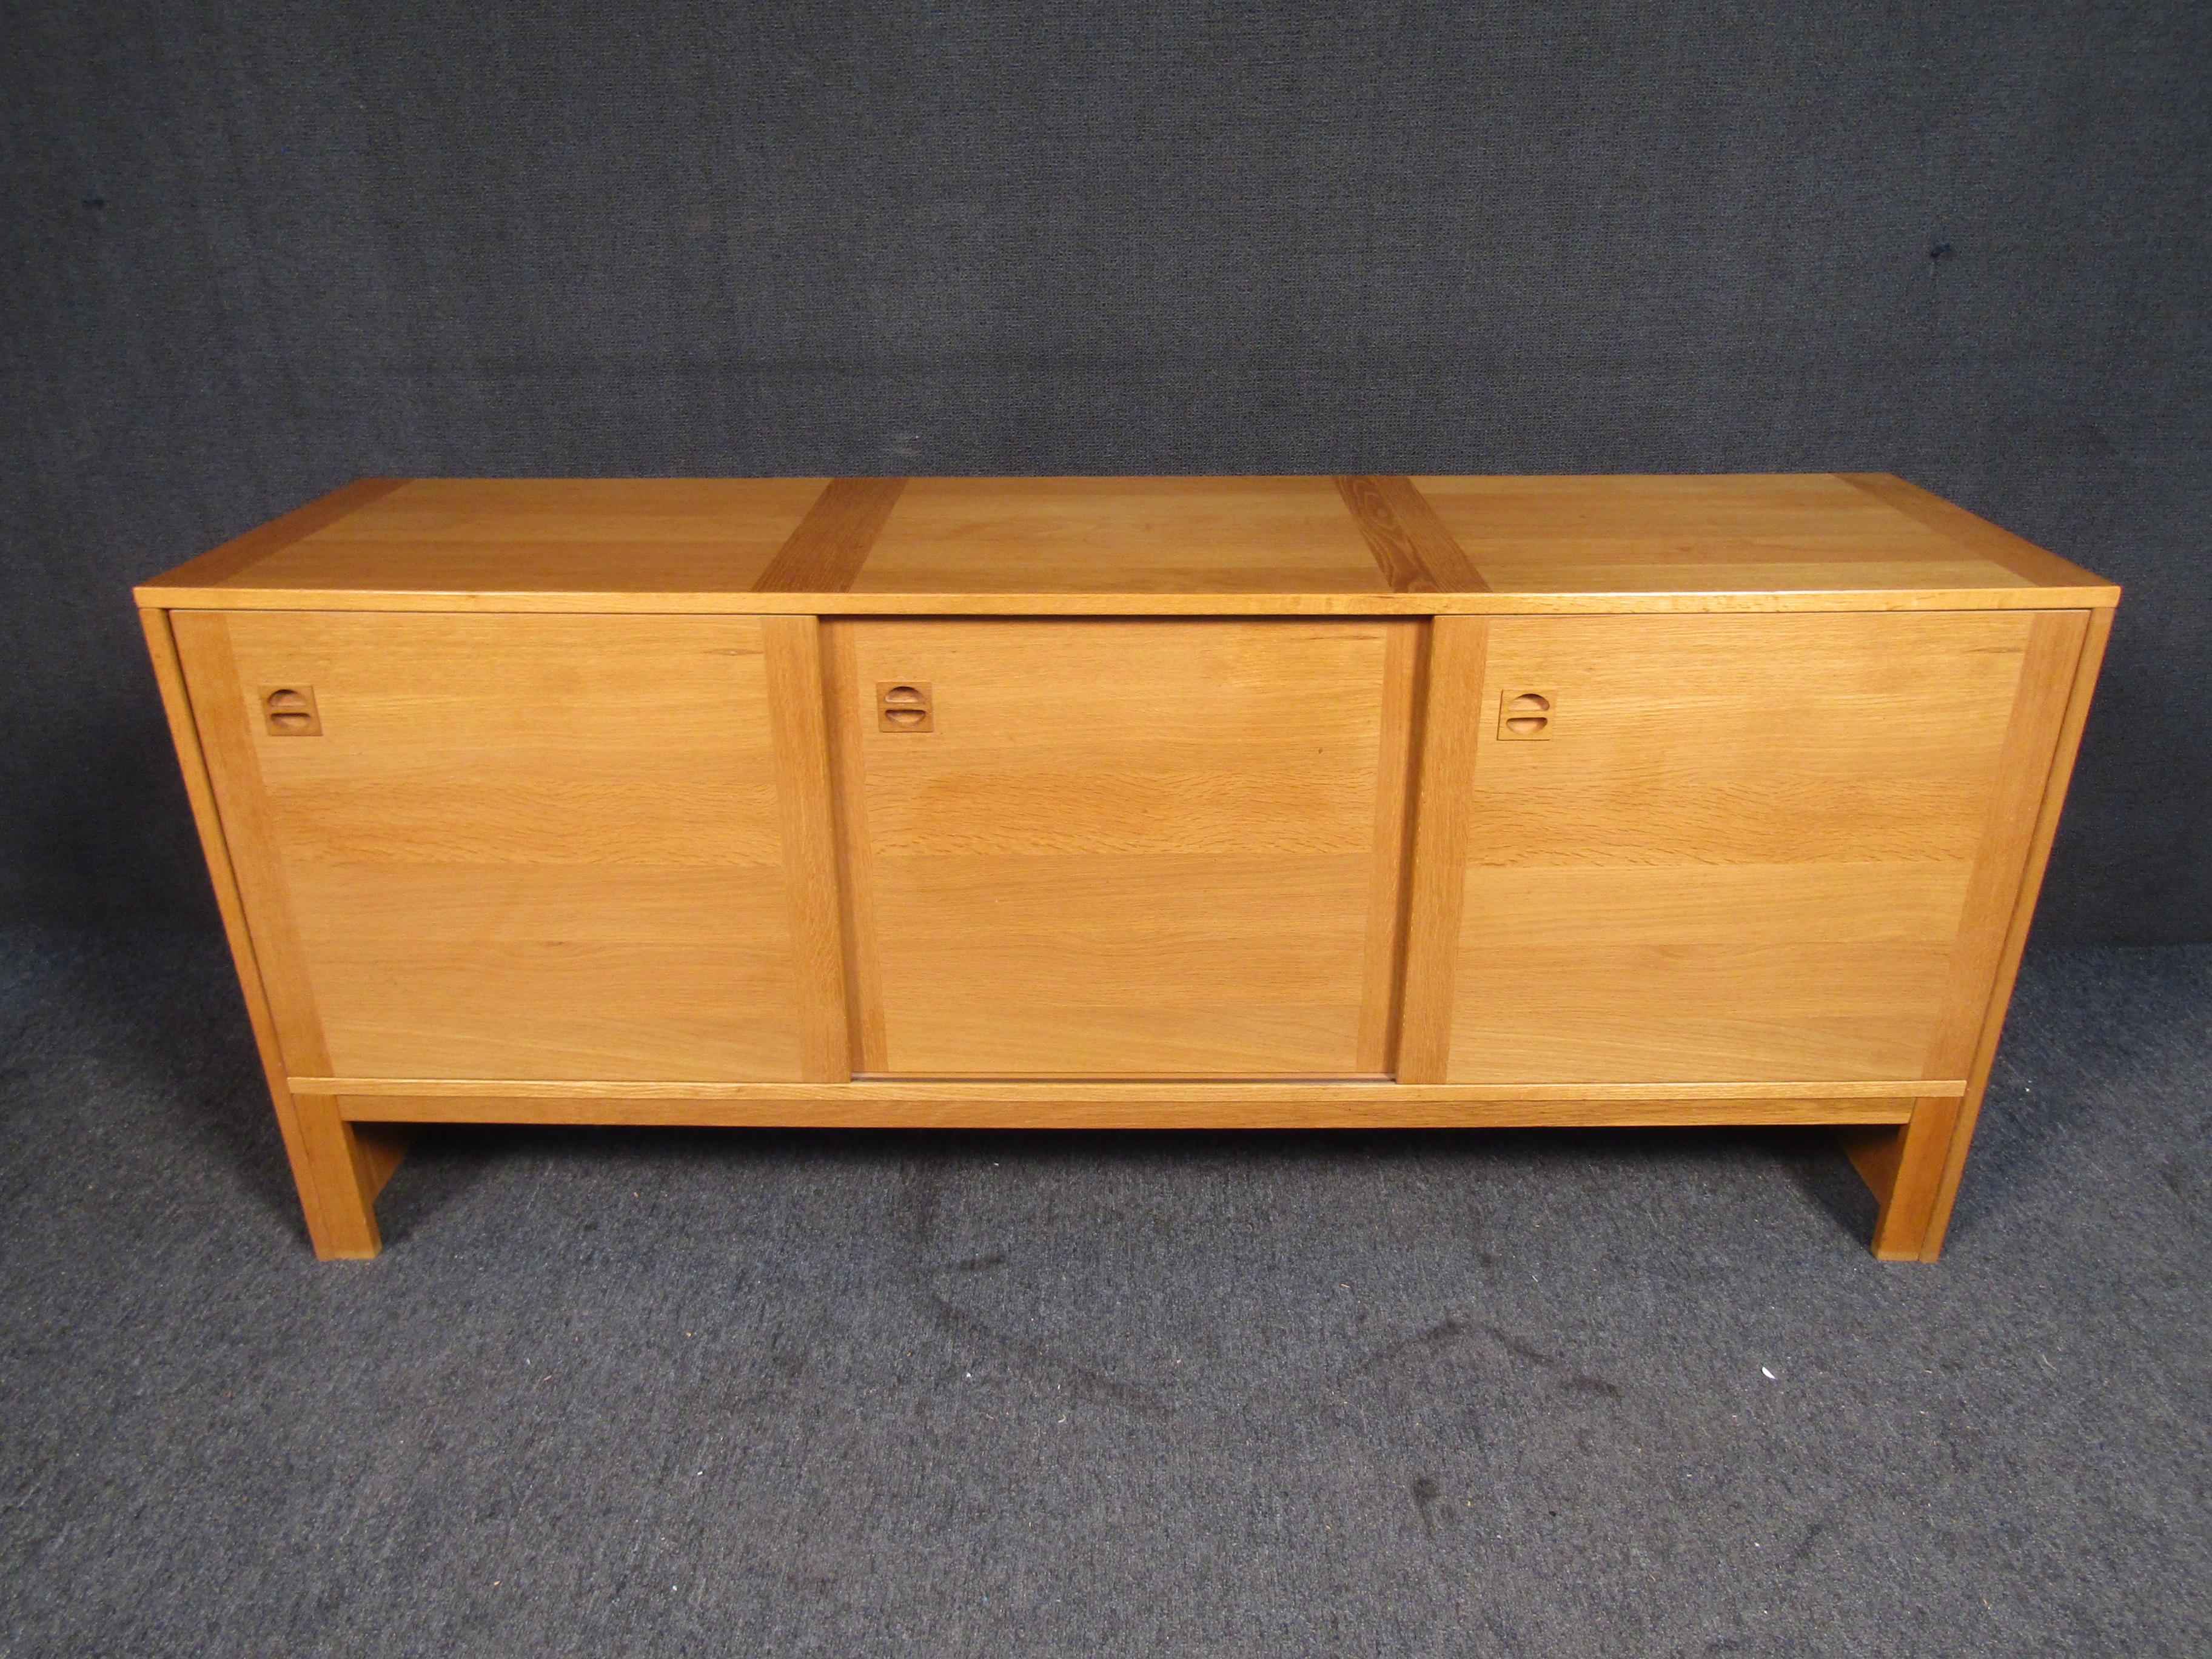 This Stunningly simple teak credenza features 3 sliding doors sitting on a sturdy Two legged base sure to compliment any bedroom.




Please confirm item location (NY or NJ).